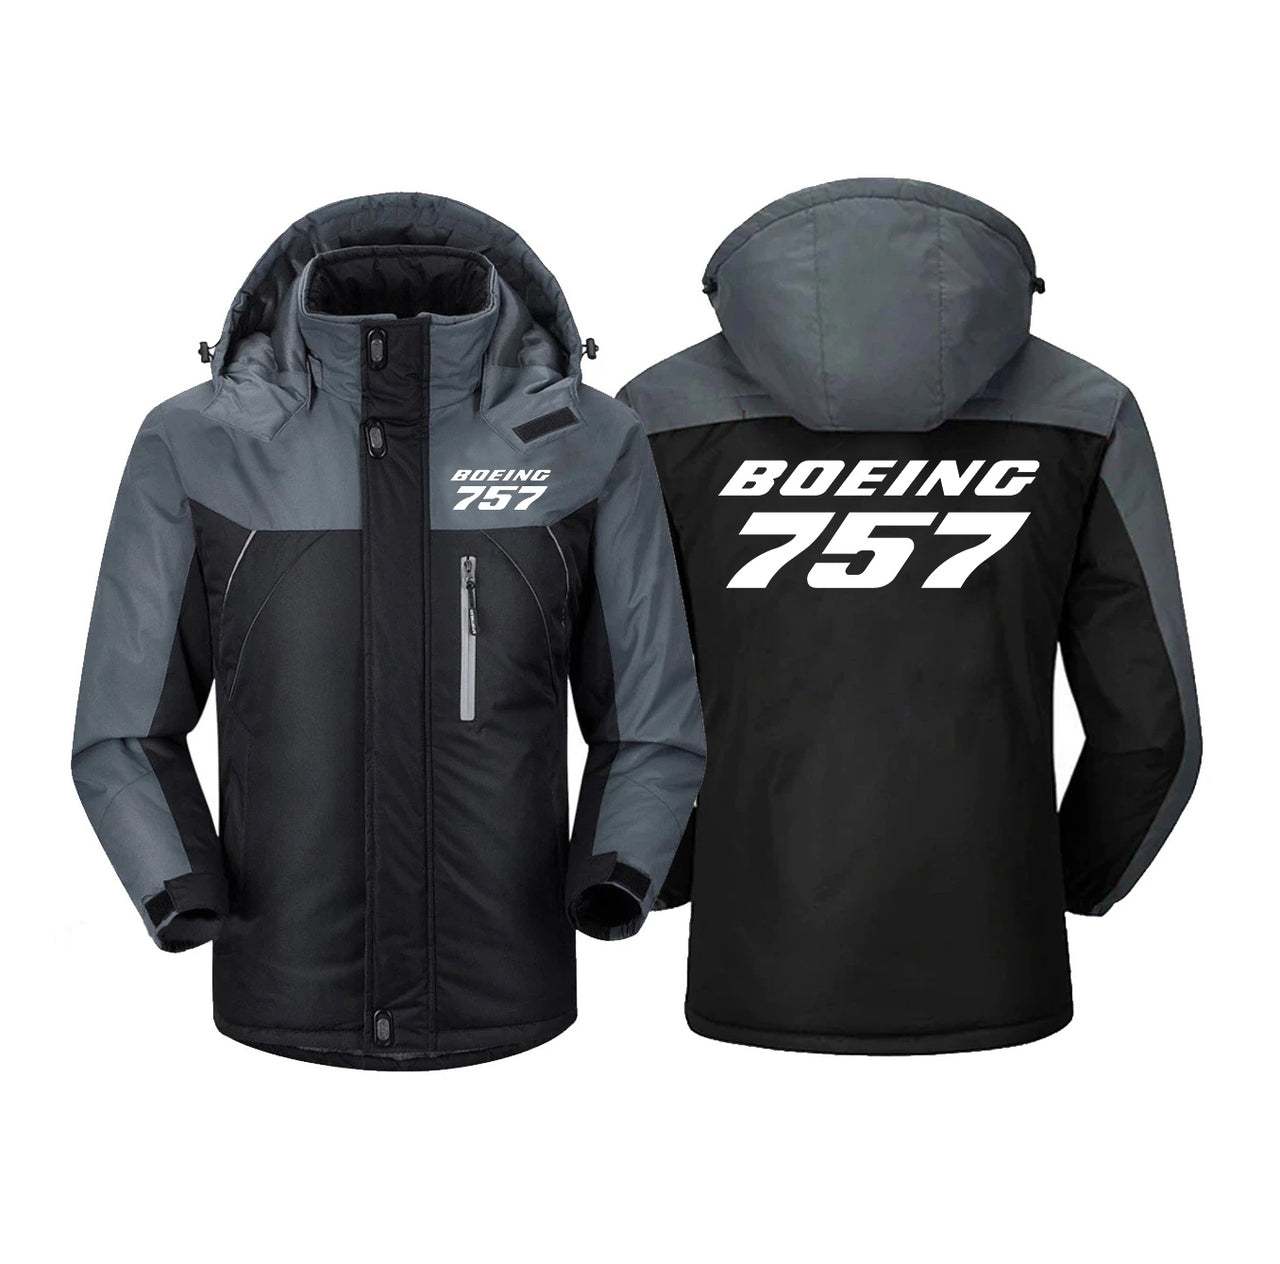 Boeing 757 & Text Designed Thick Winter Jackets